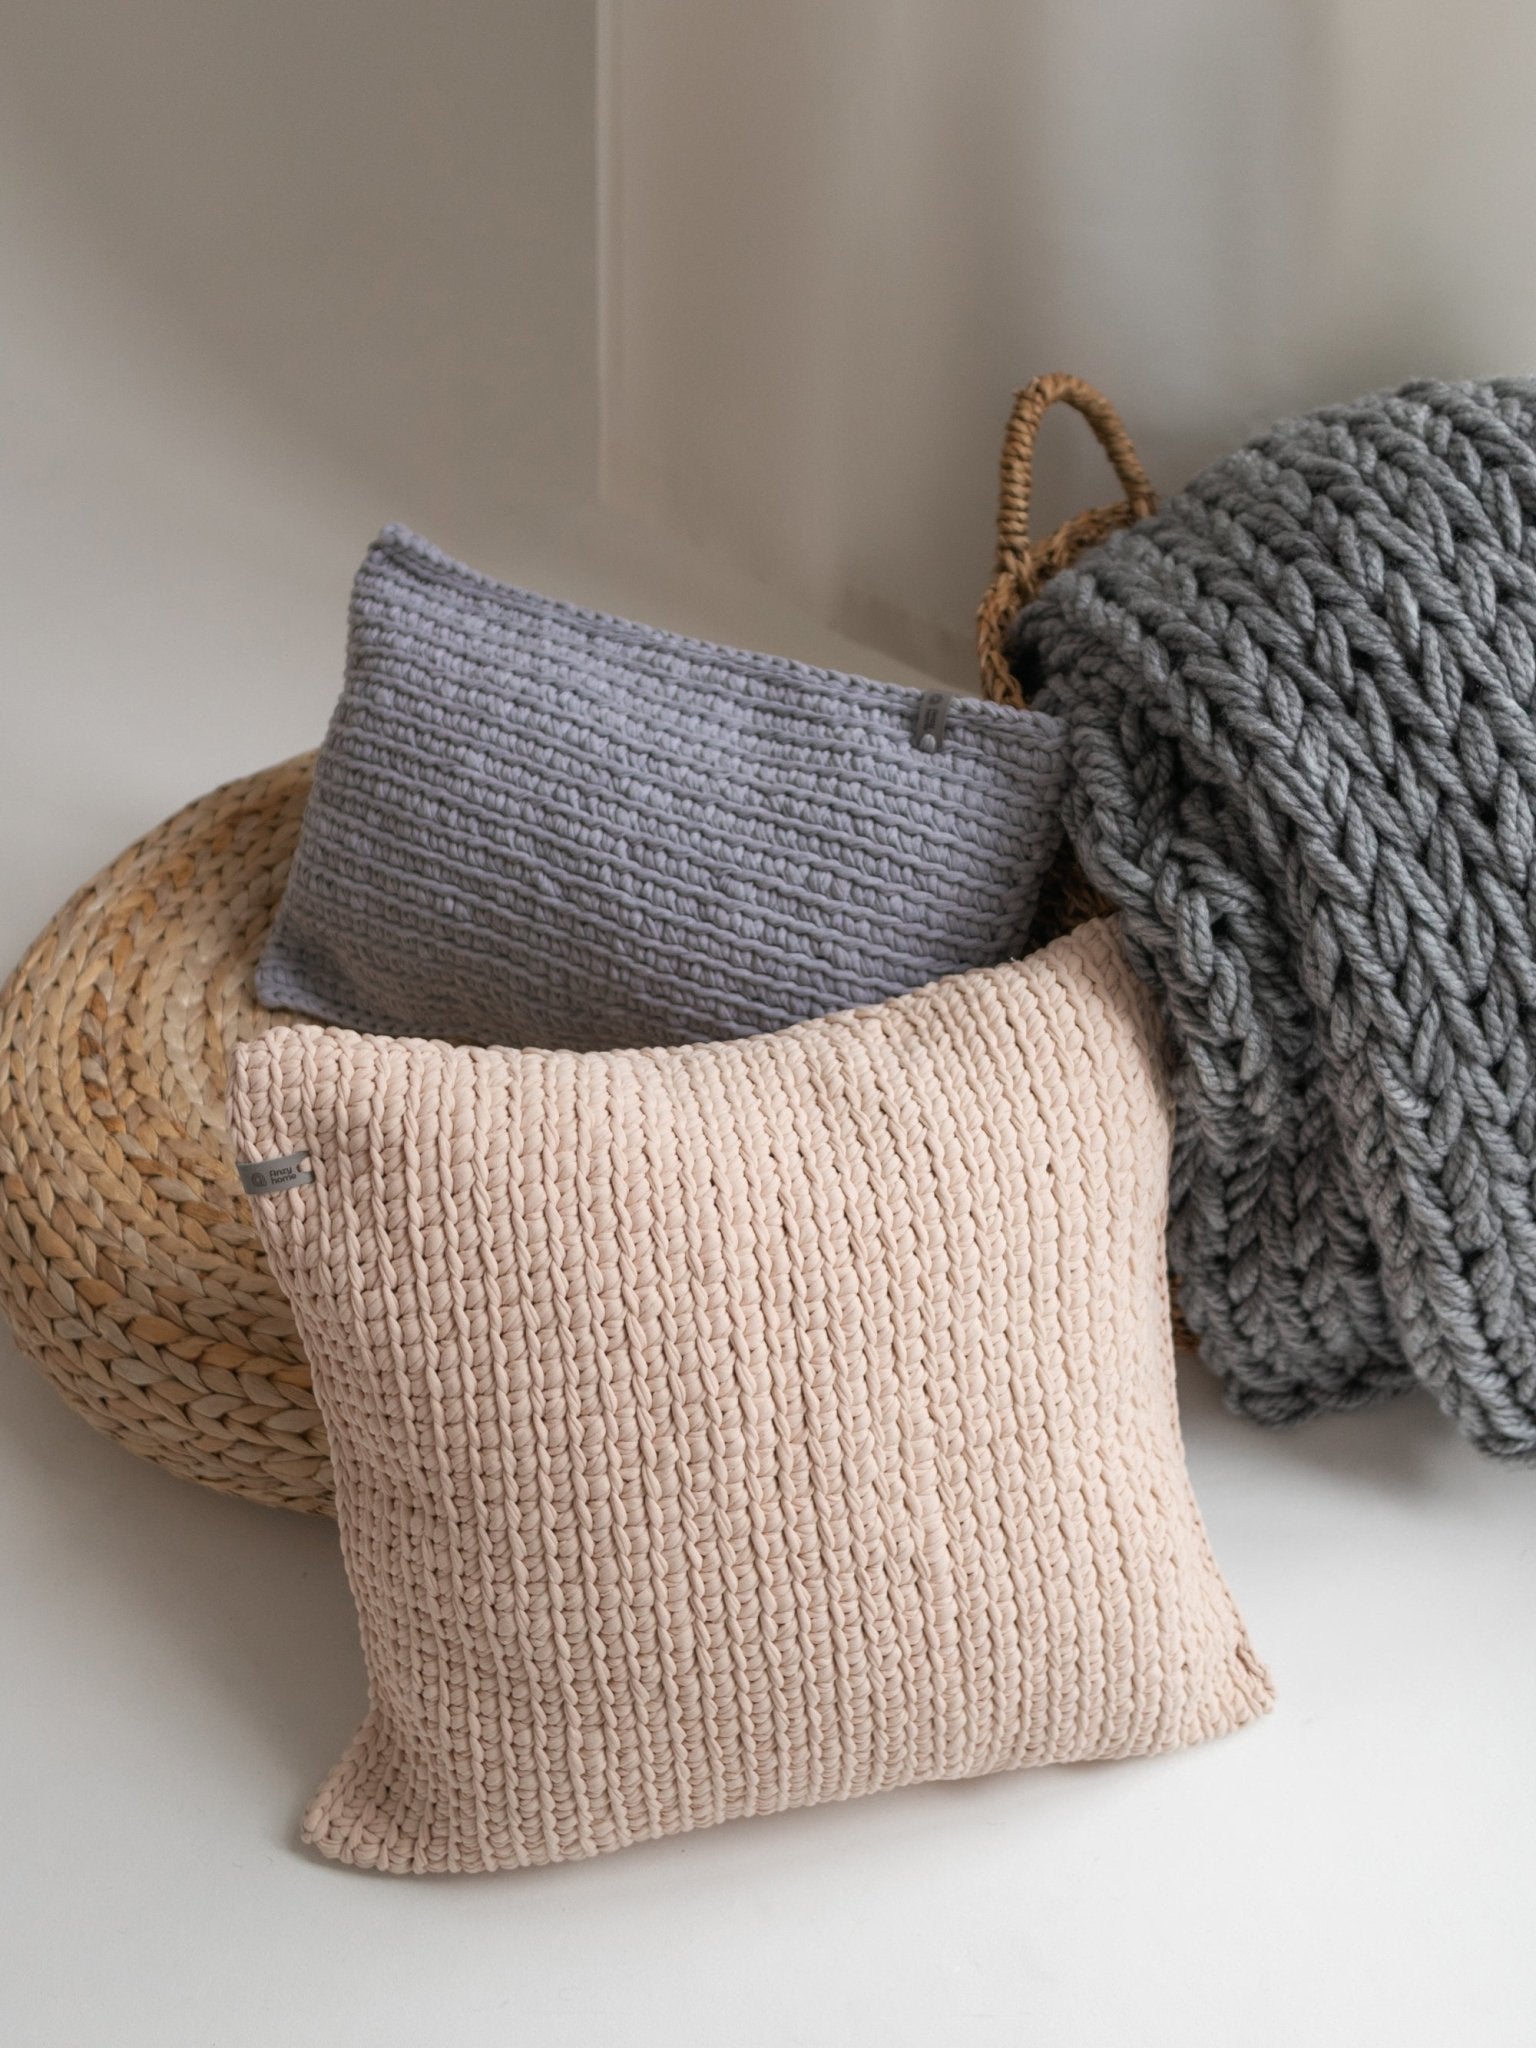 TEXTURED HANDKNIT PILLOW TAUPE 20” - The Modern Heritage